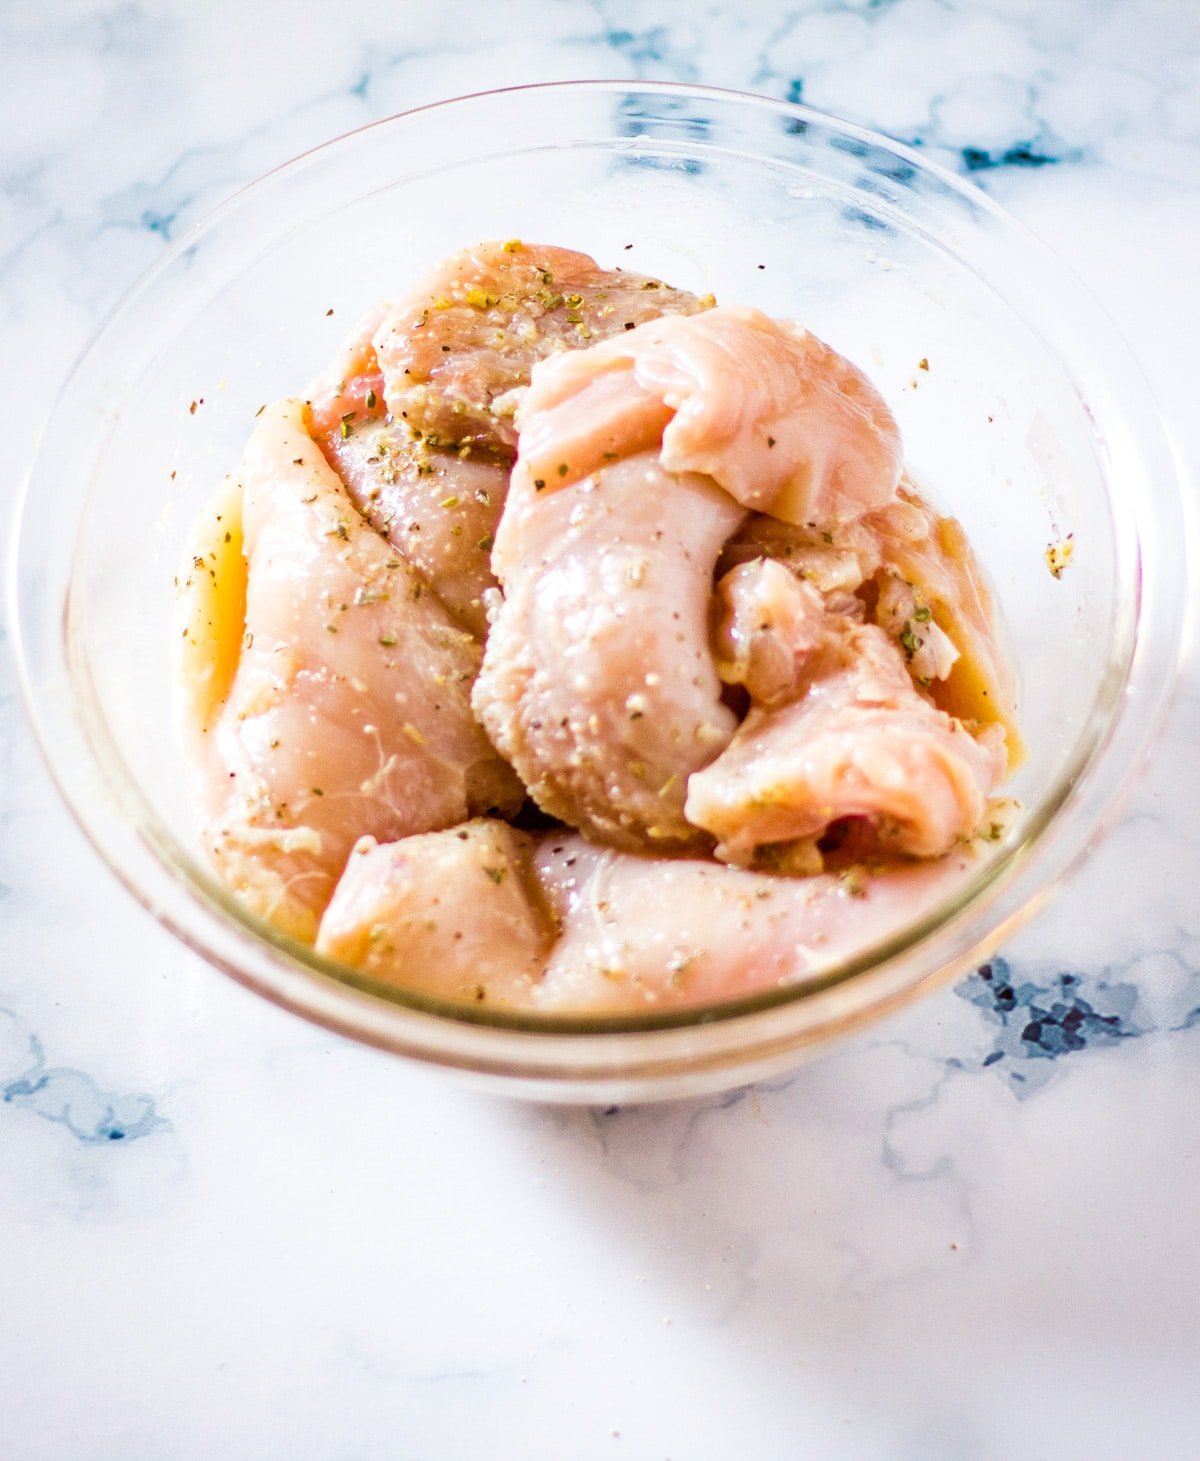 Marinated chicken in a glass mixing bowl on a white marble backdrop.